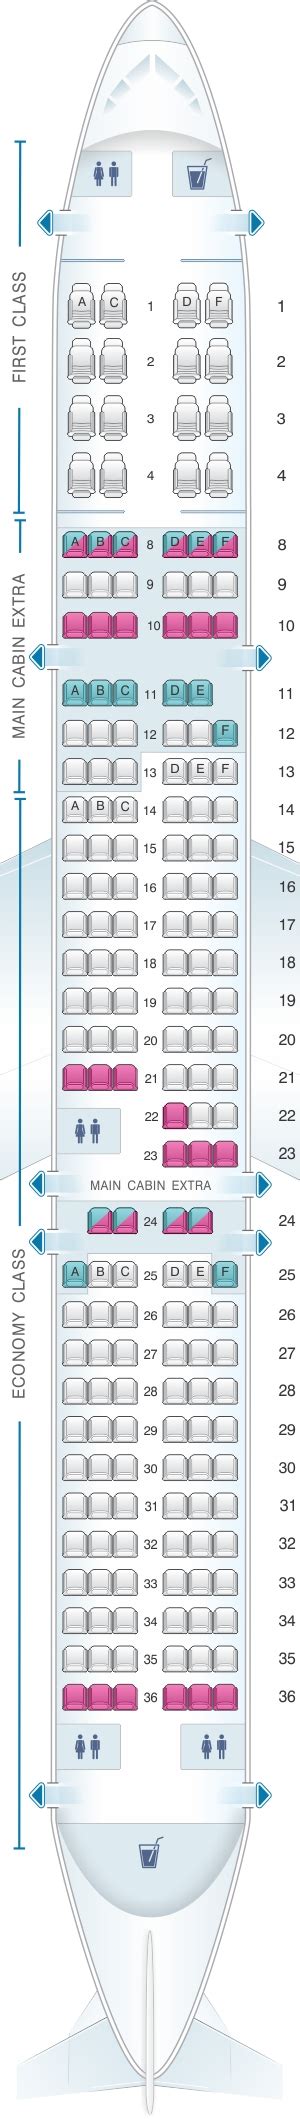 Photos American Airlines A First Class Seating Chart And